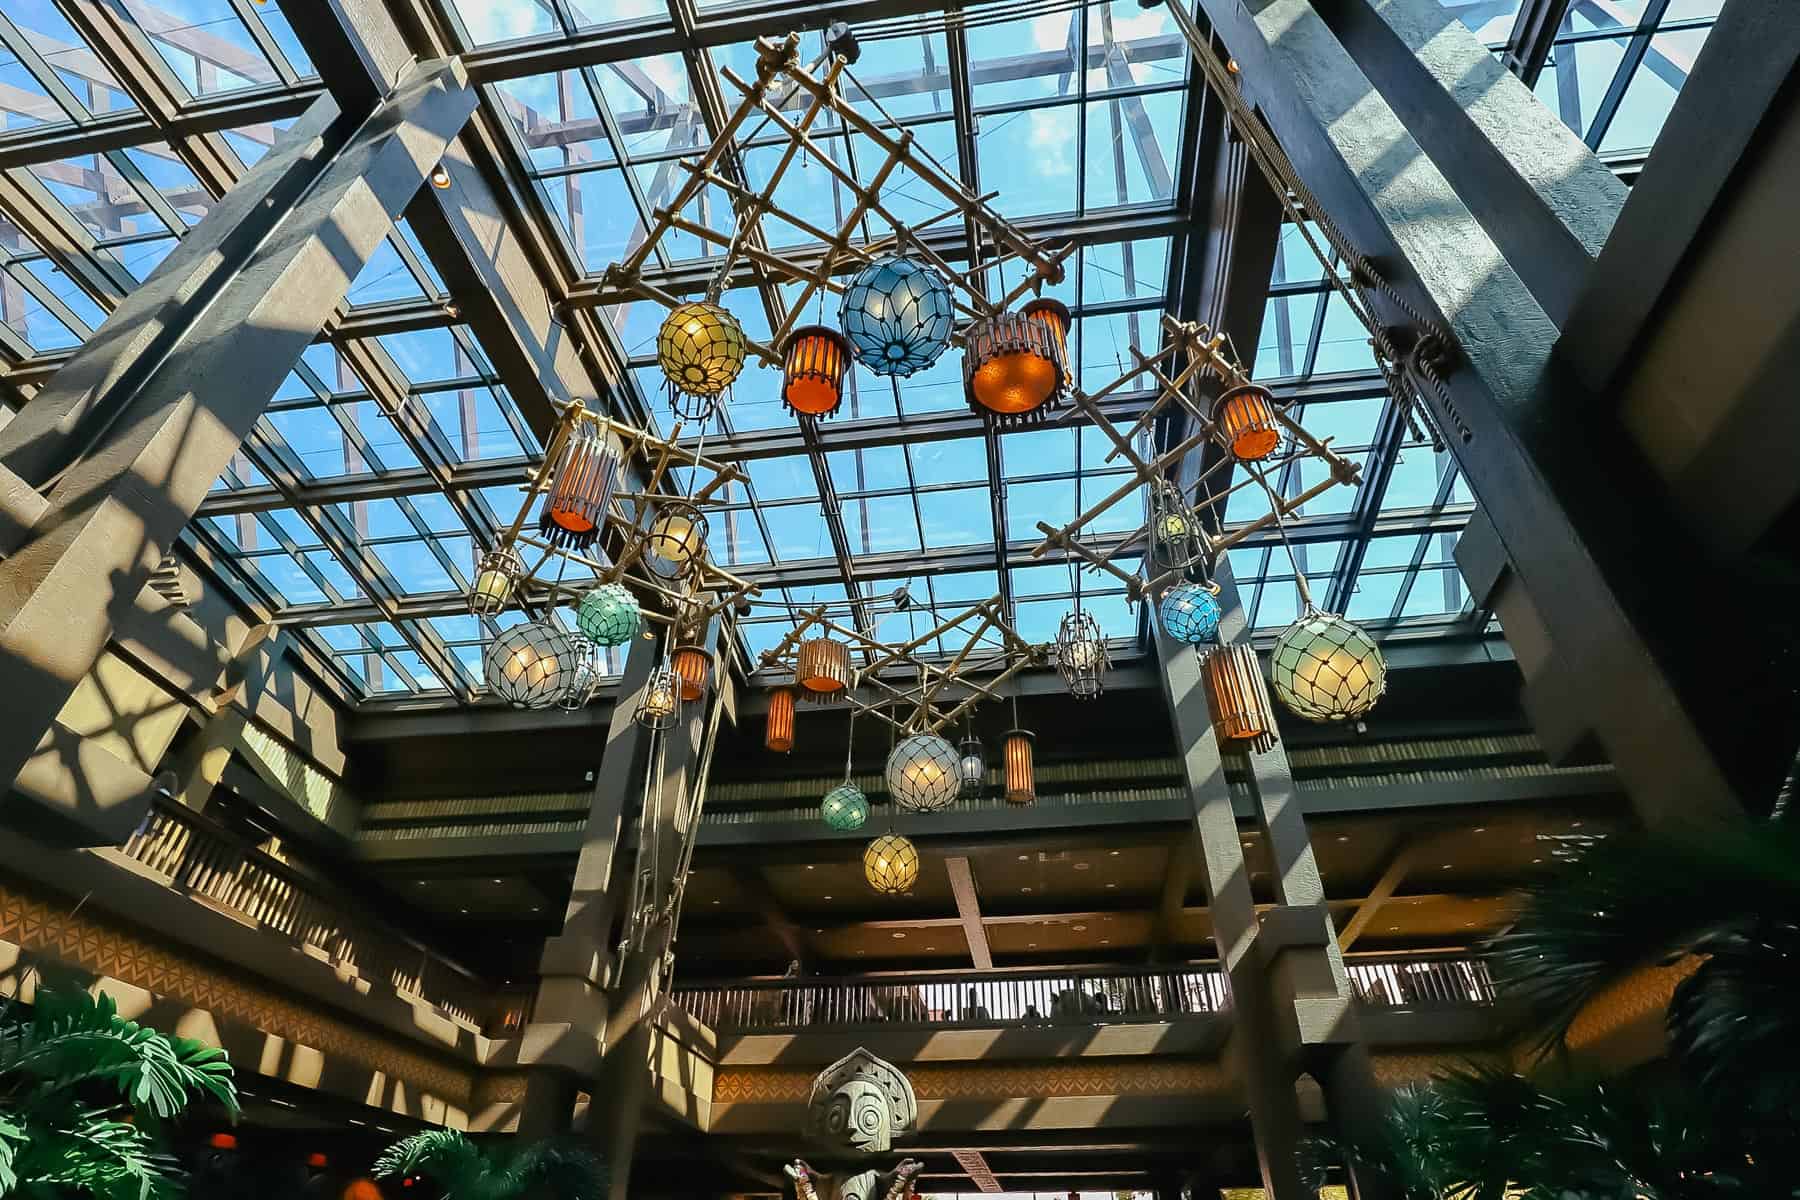 Light fixture in ceiling of the Polynesian lobby with hidden Mickey detail.